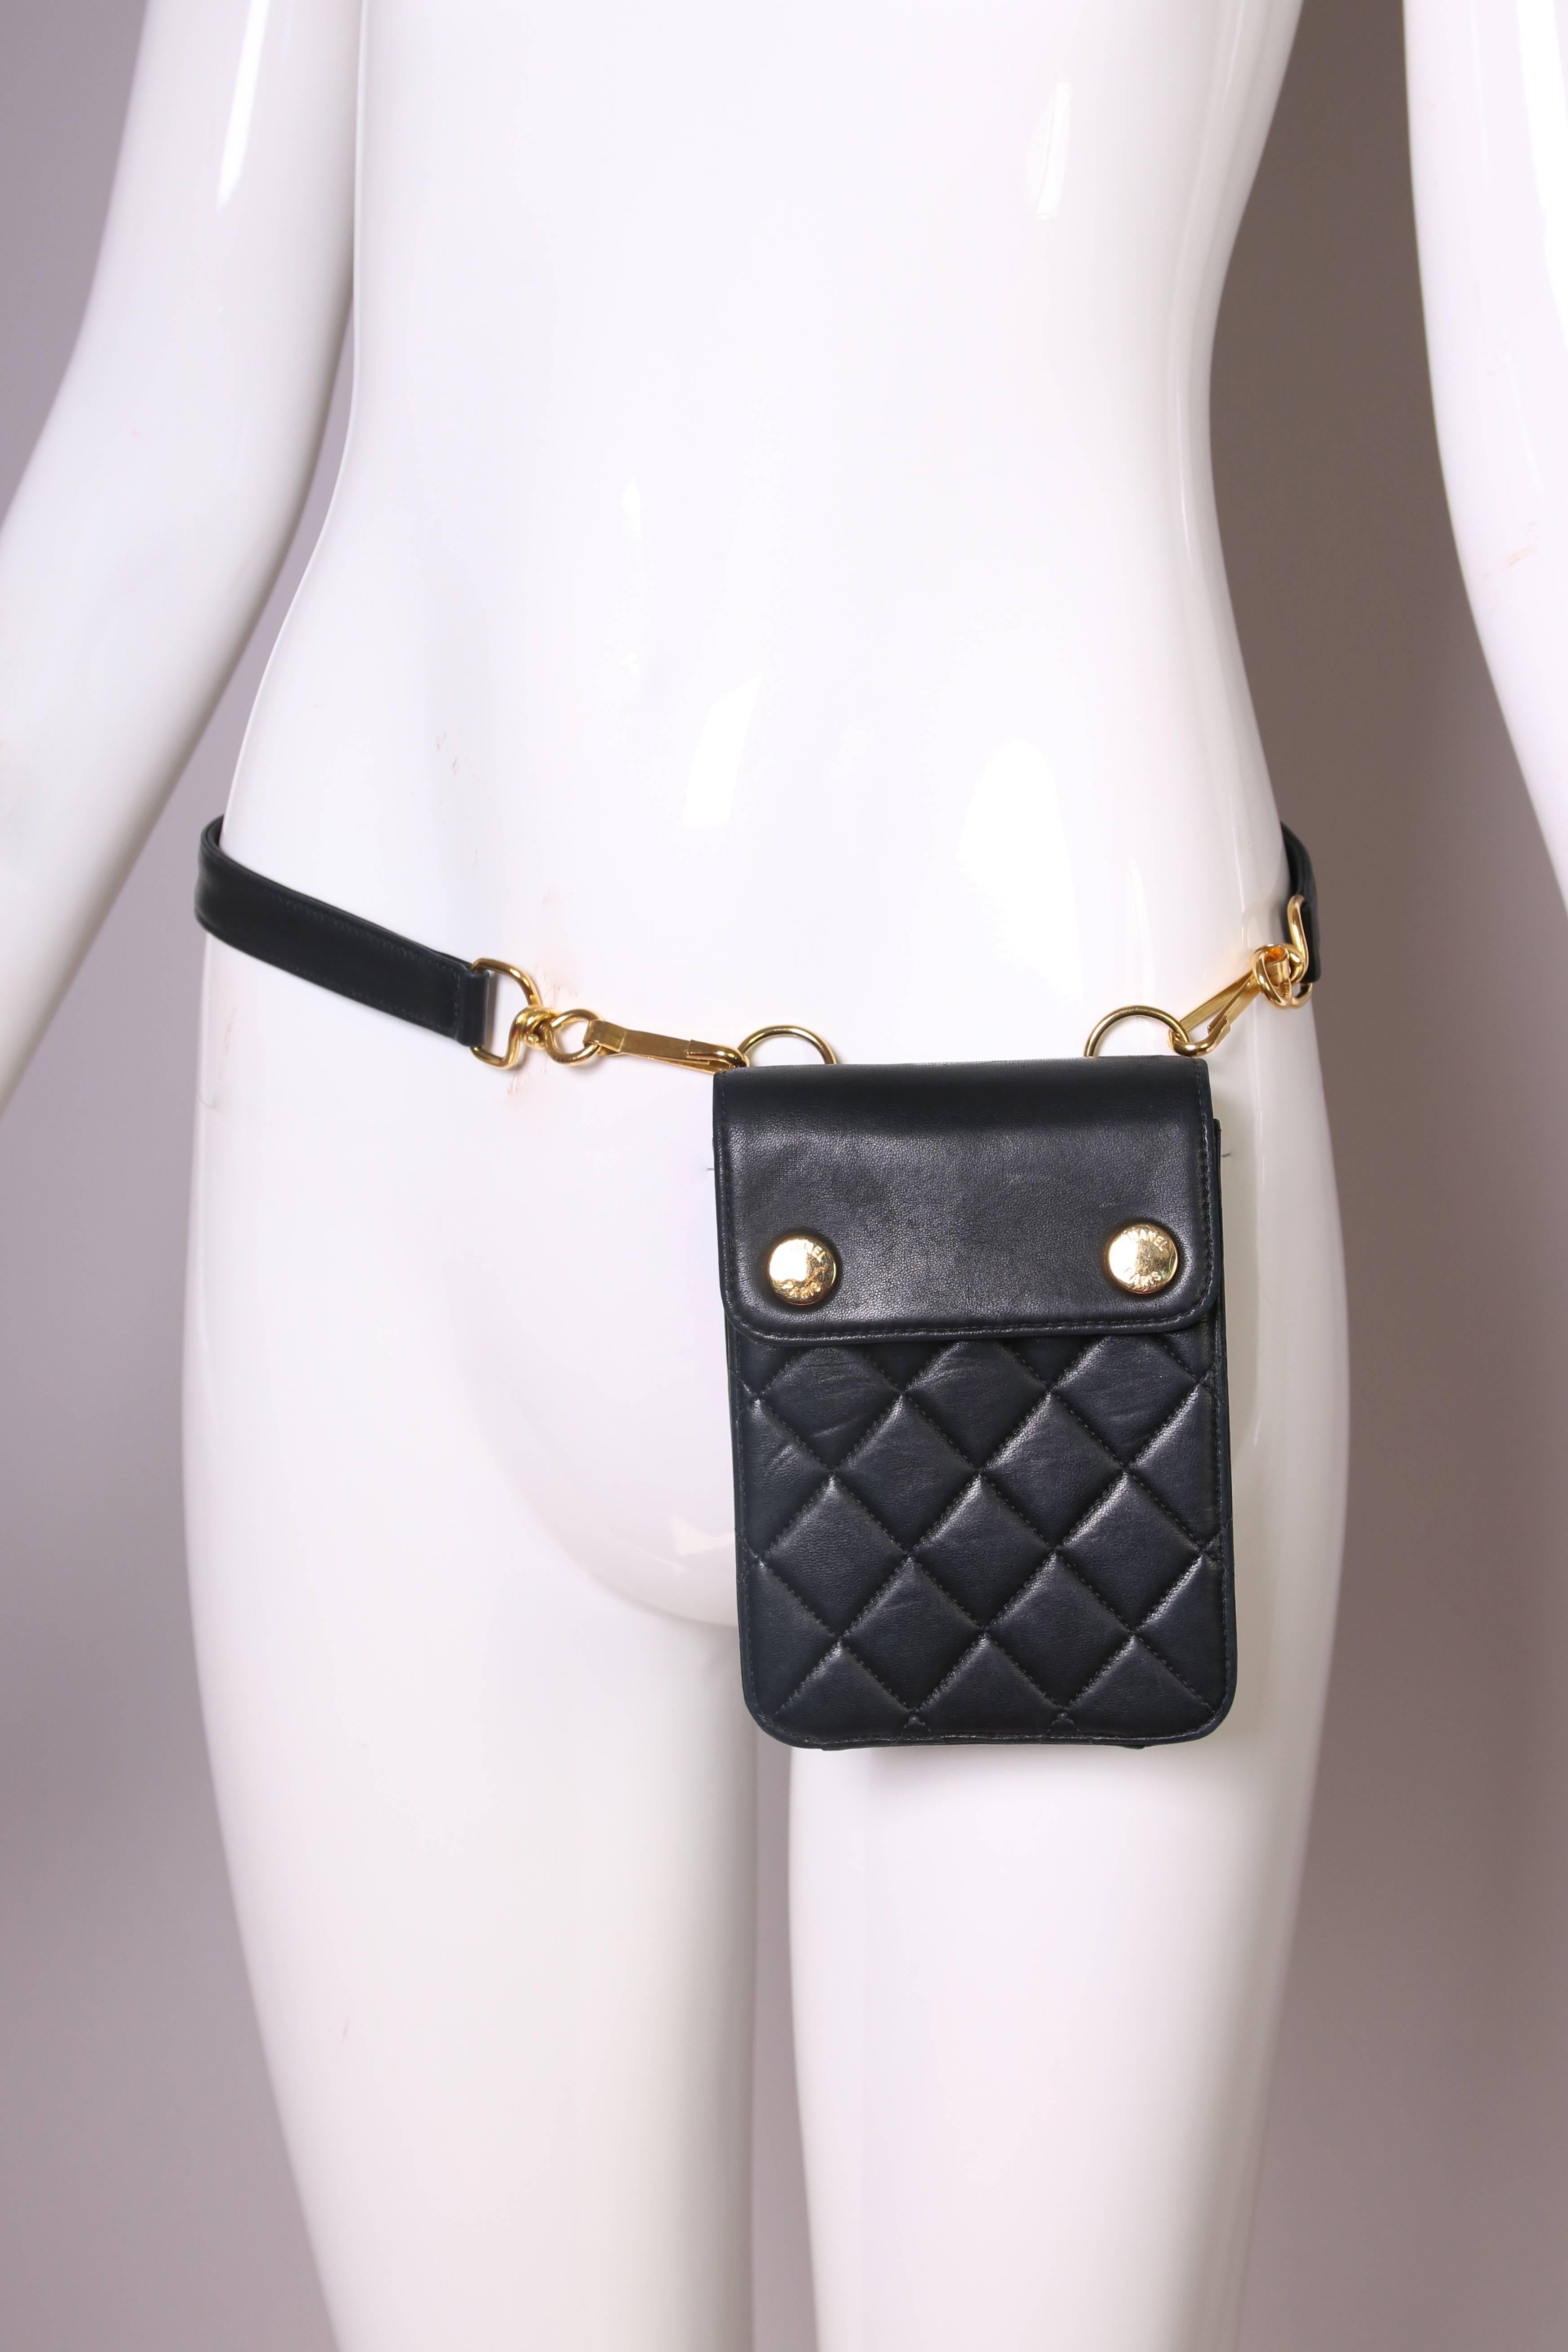 Circa 1996/1997 Chanel black quilted leather waist bag with gold hardware. In excellent condition. Strap stamped 80/32 at interior. Has hologram sticker with serial number: 4436366.
MEASUREMENTS:
Bag
Length - 6